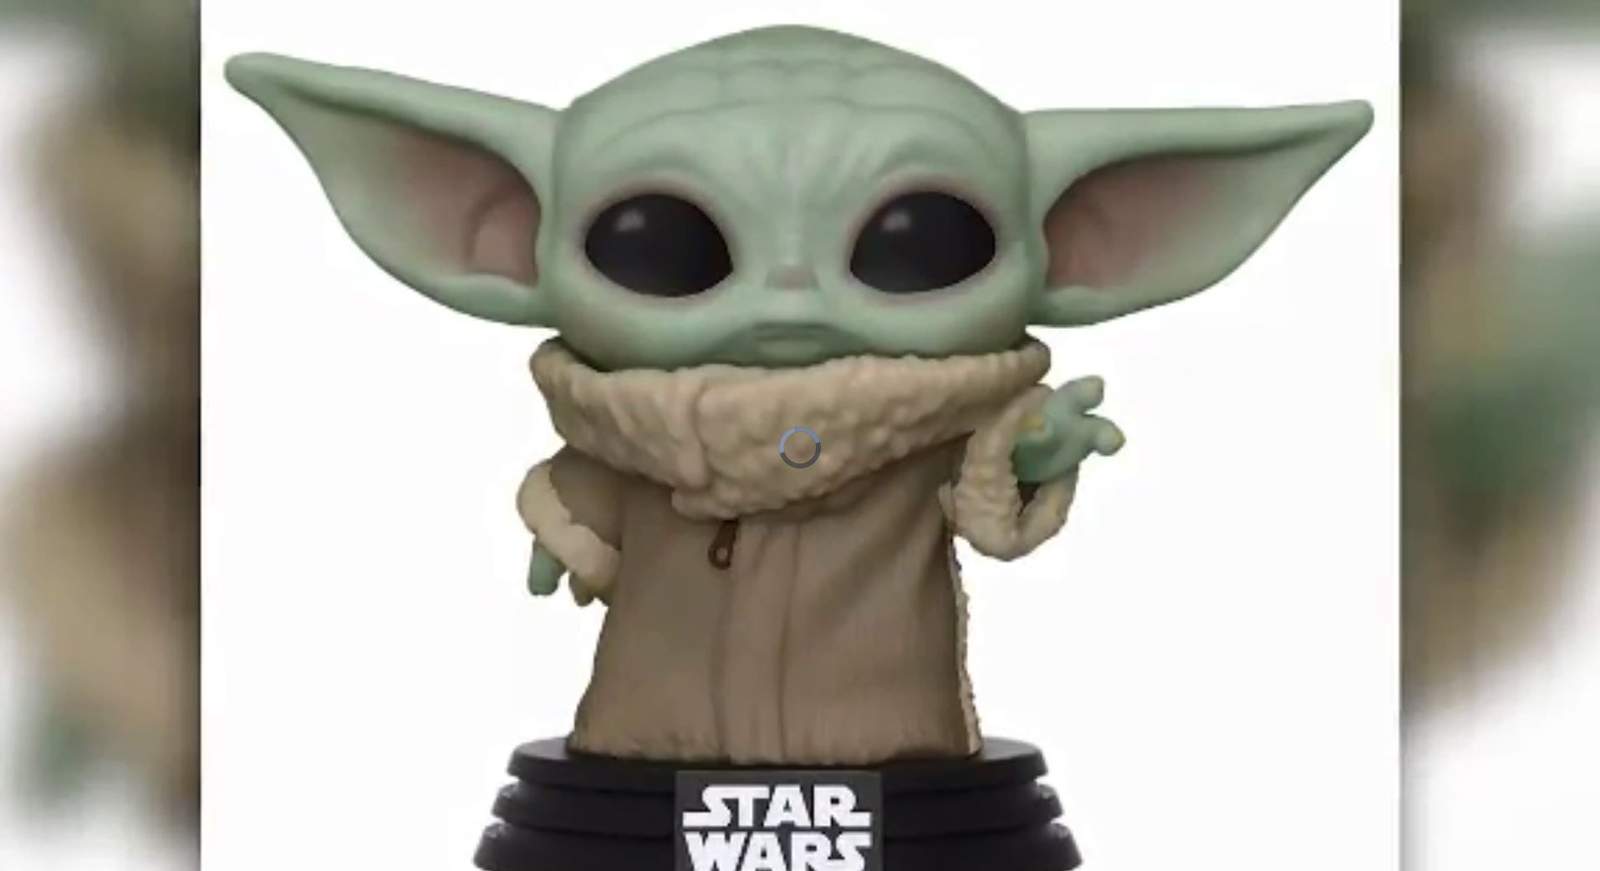 Baby Yoda toys not available in time for Christmas